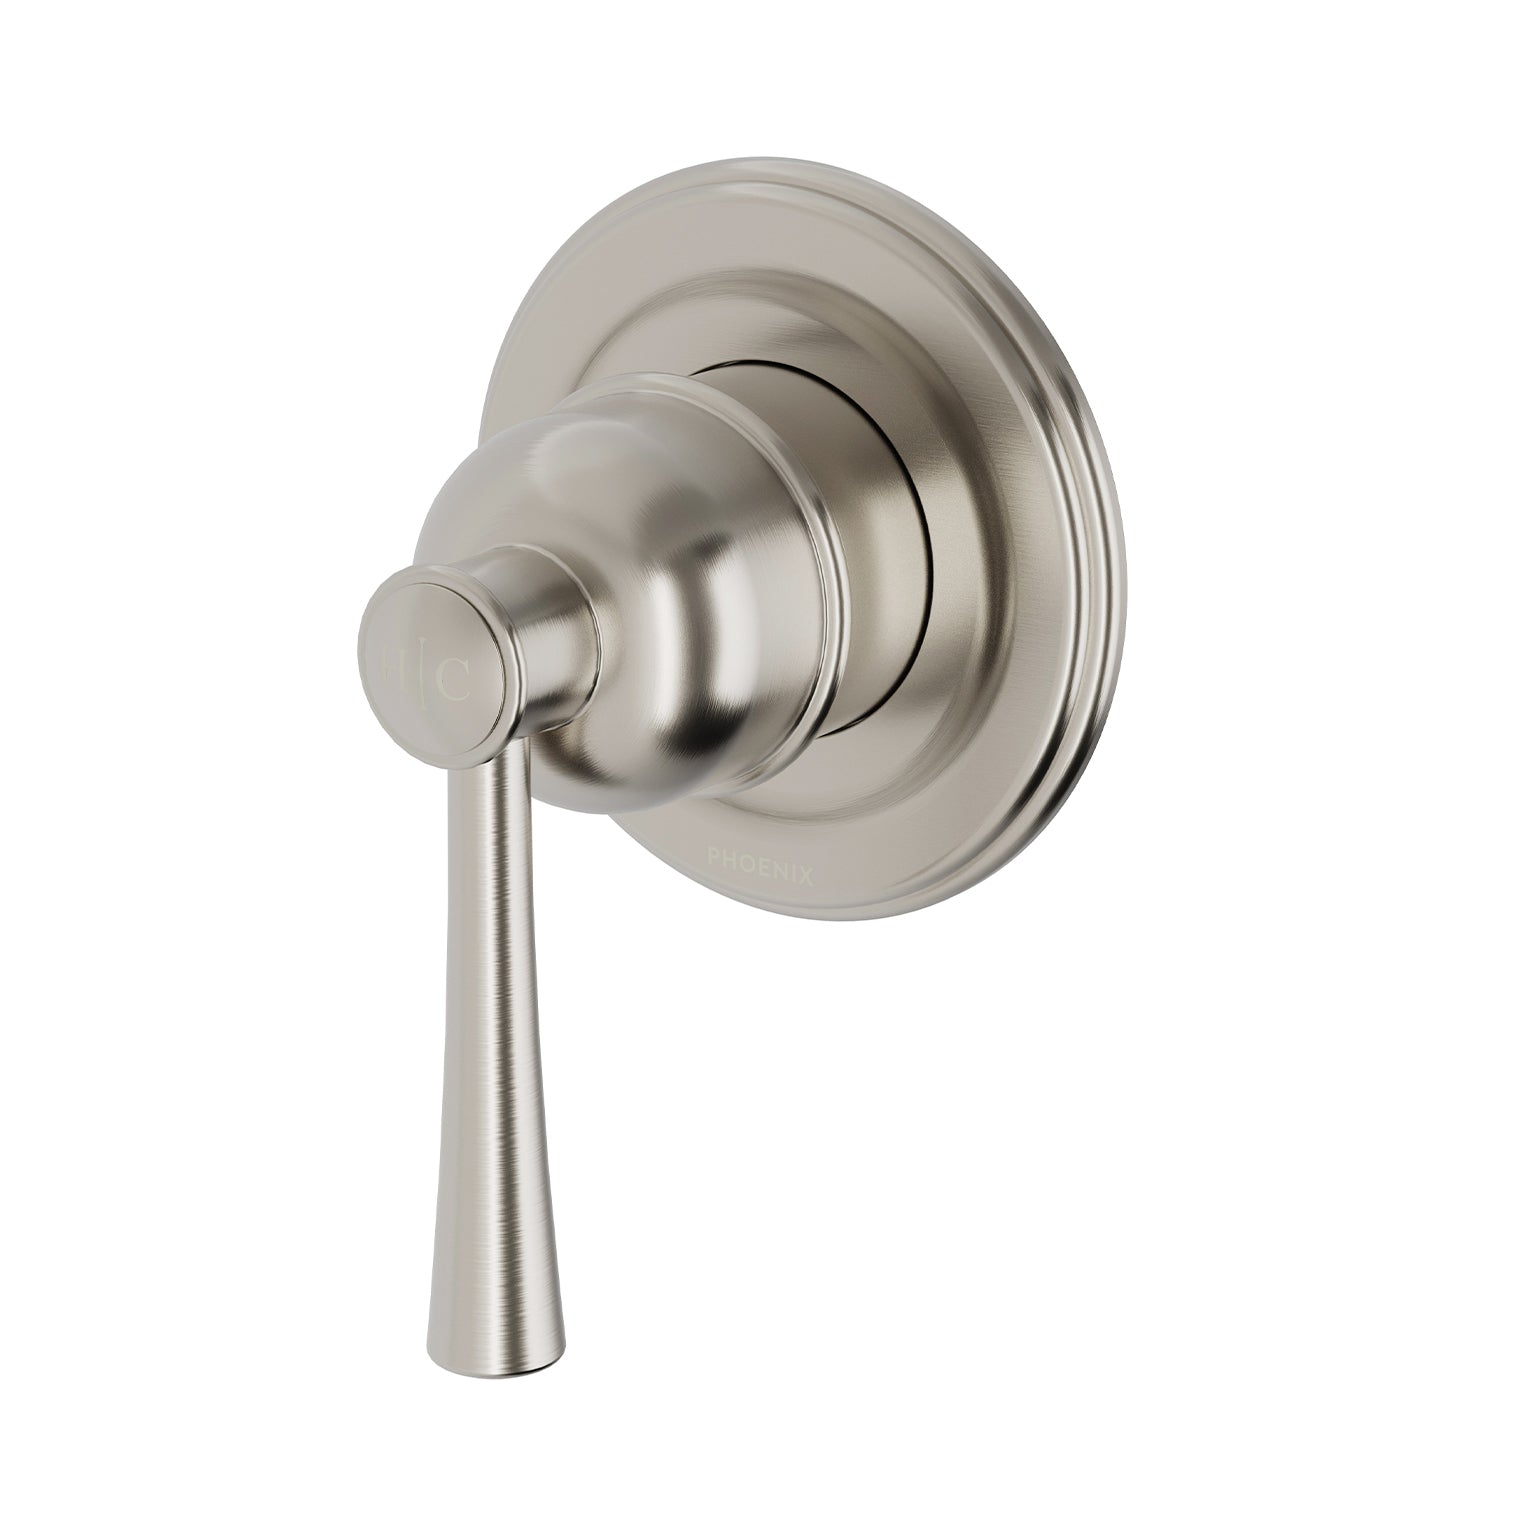 PHOENIX CROMFORD SWITCHMIX SHOWER / WALL MIXER FIT-OFF AND ROUGH-IN KIT BRUSHED NICKEL